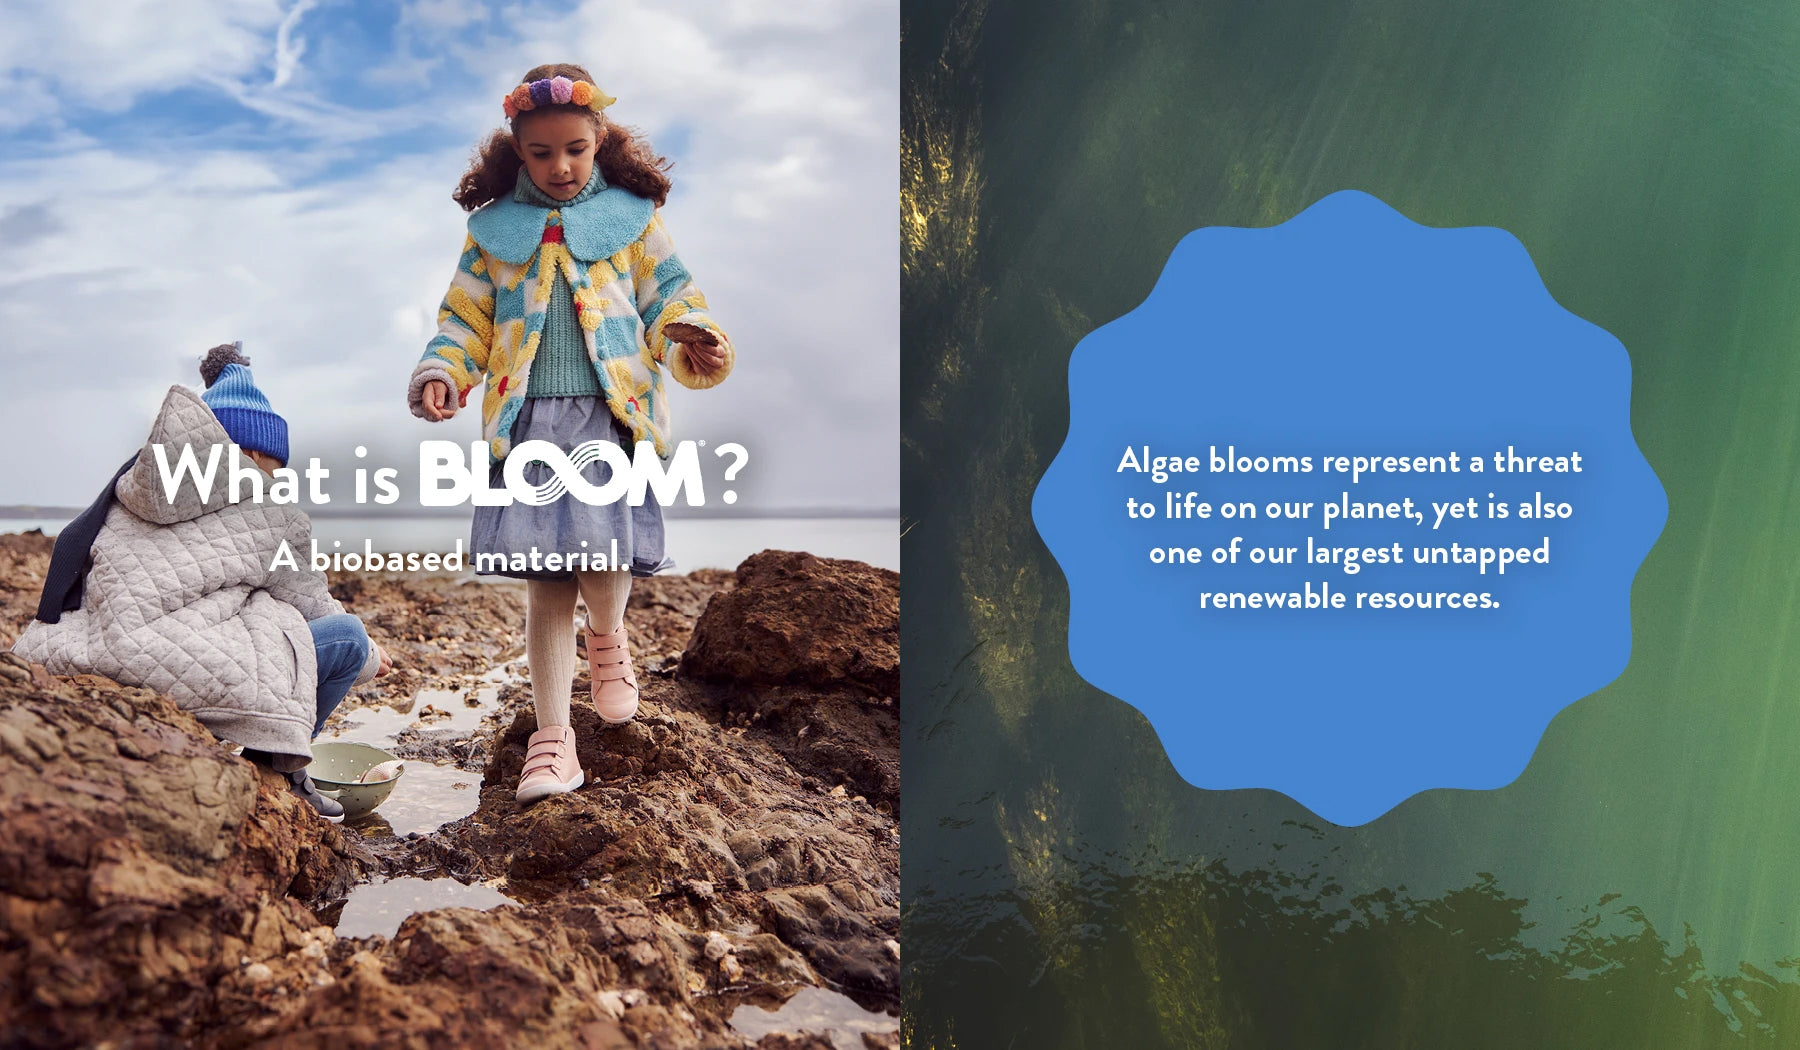 What is Bloom? A biobased material. Algaue blooms represent a threat to life on our planet, yet is also one of our largest untapped renewable resources.